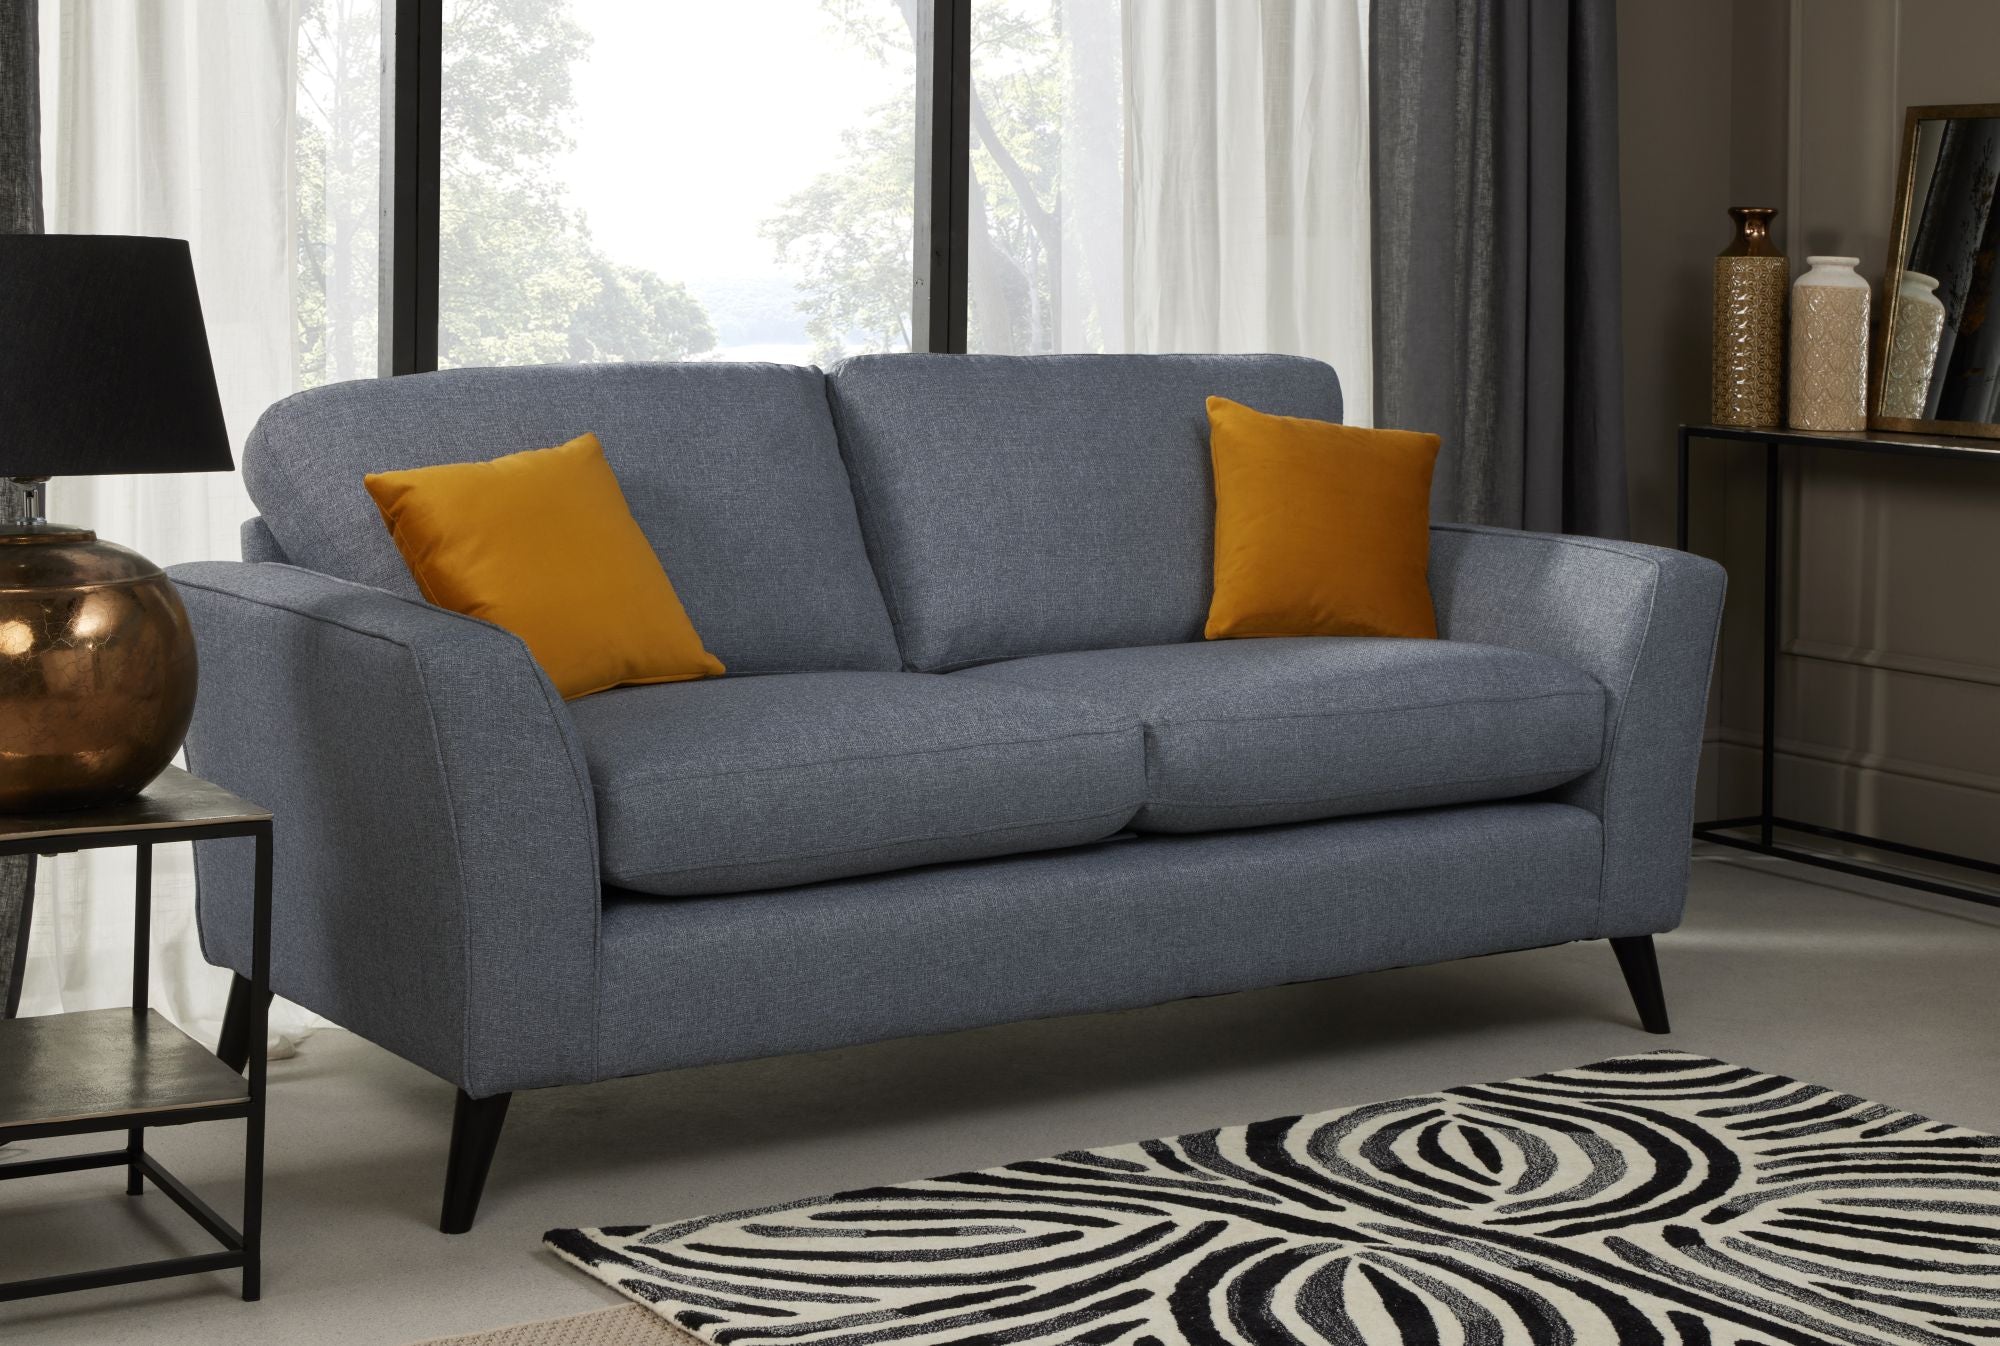 Libby 3 seater in denim shown in a room setting 